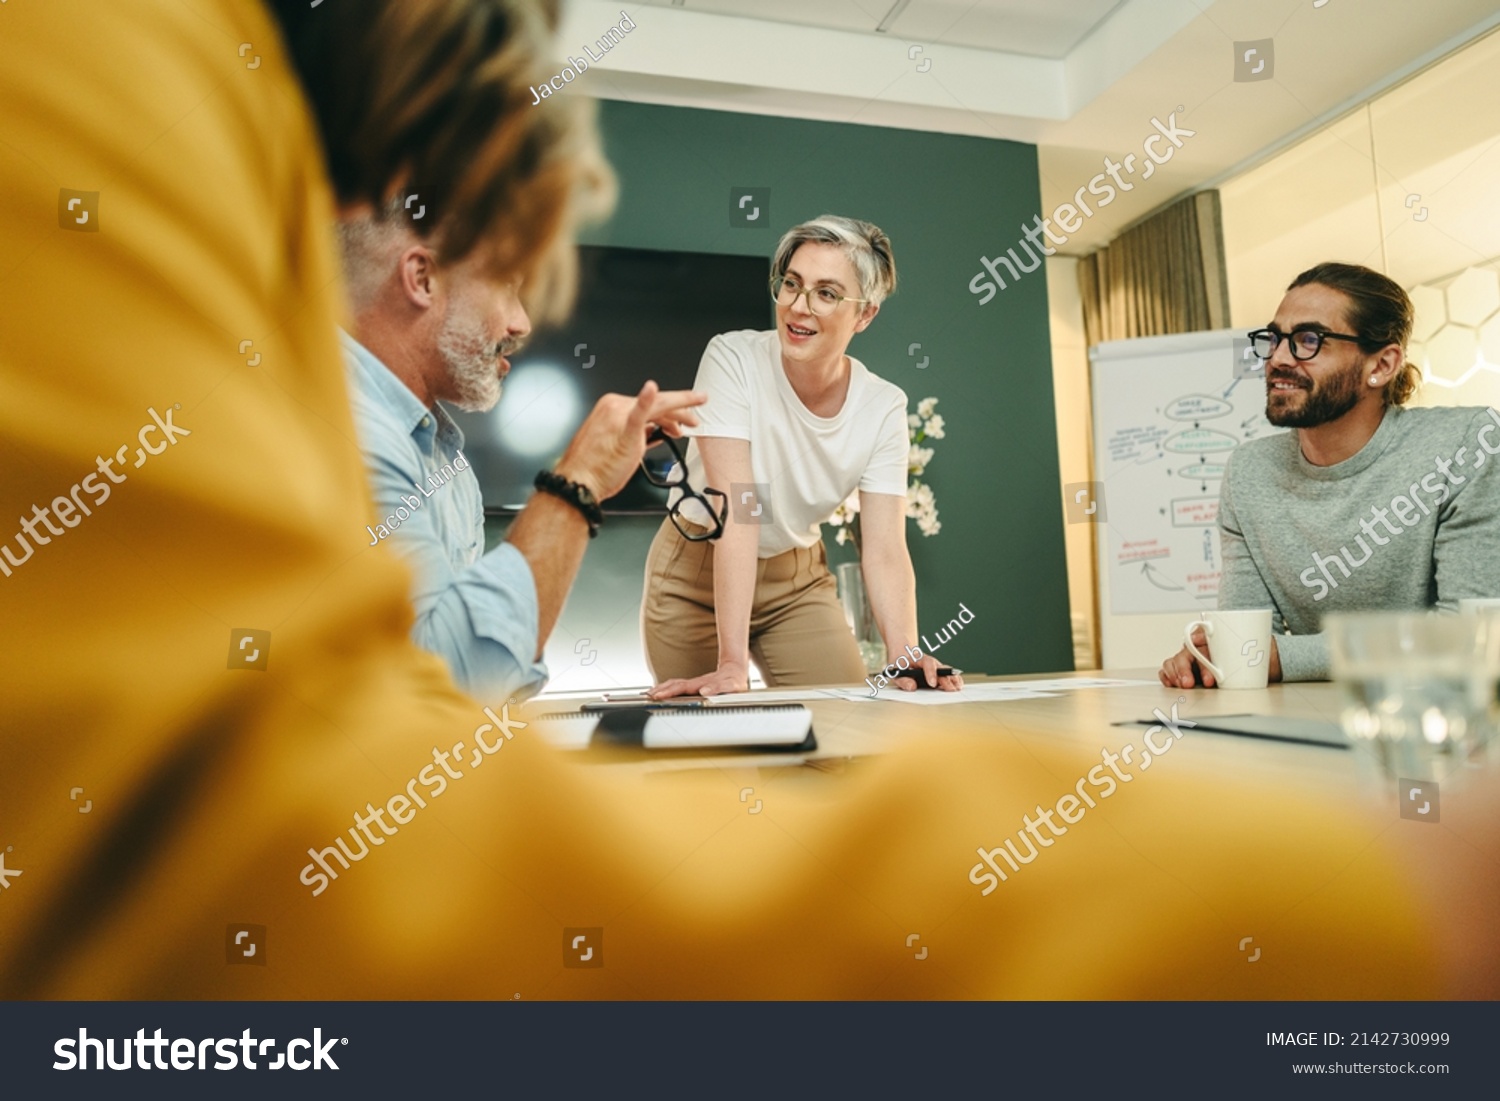 Happy businesspeople having a discussion in a boardroom. Group of cheerful business professionals sharing creative ideas during a meeting in a modern workplace. #2142730999